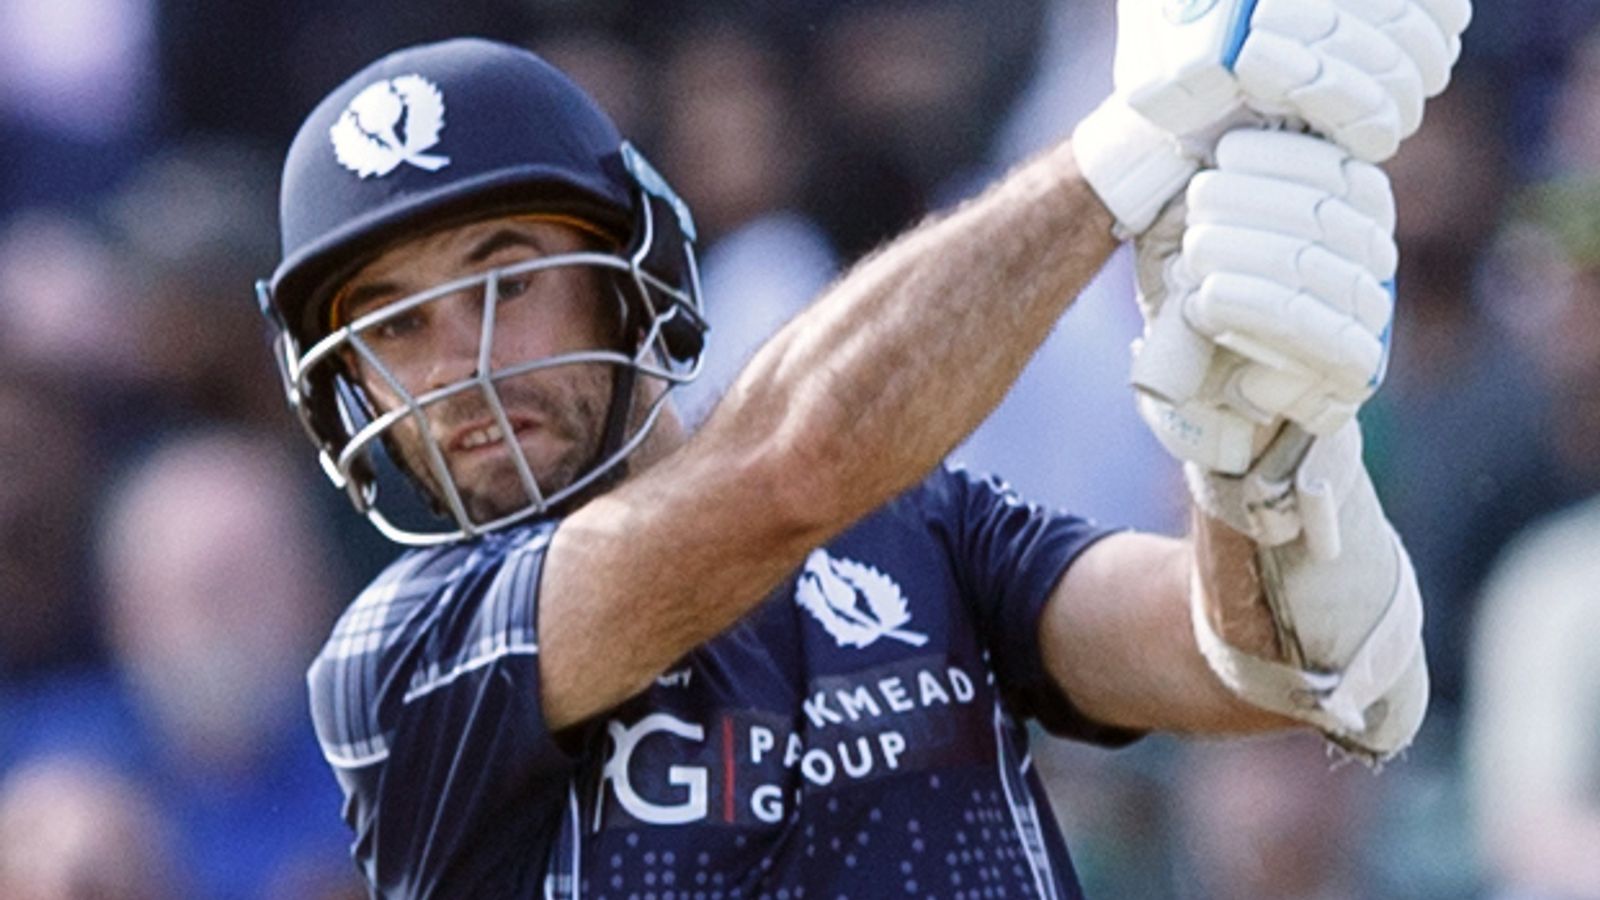 Scotland captain Kyle Coetzer to stand down after 110 games at the helm